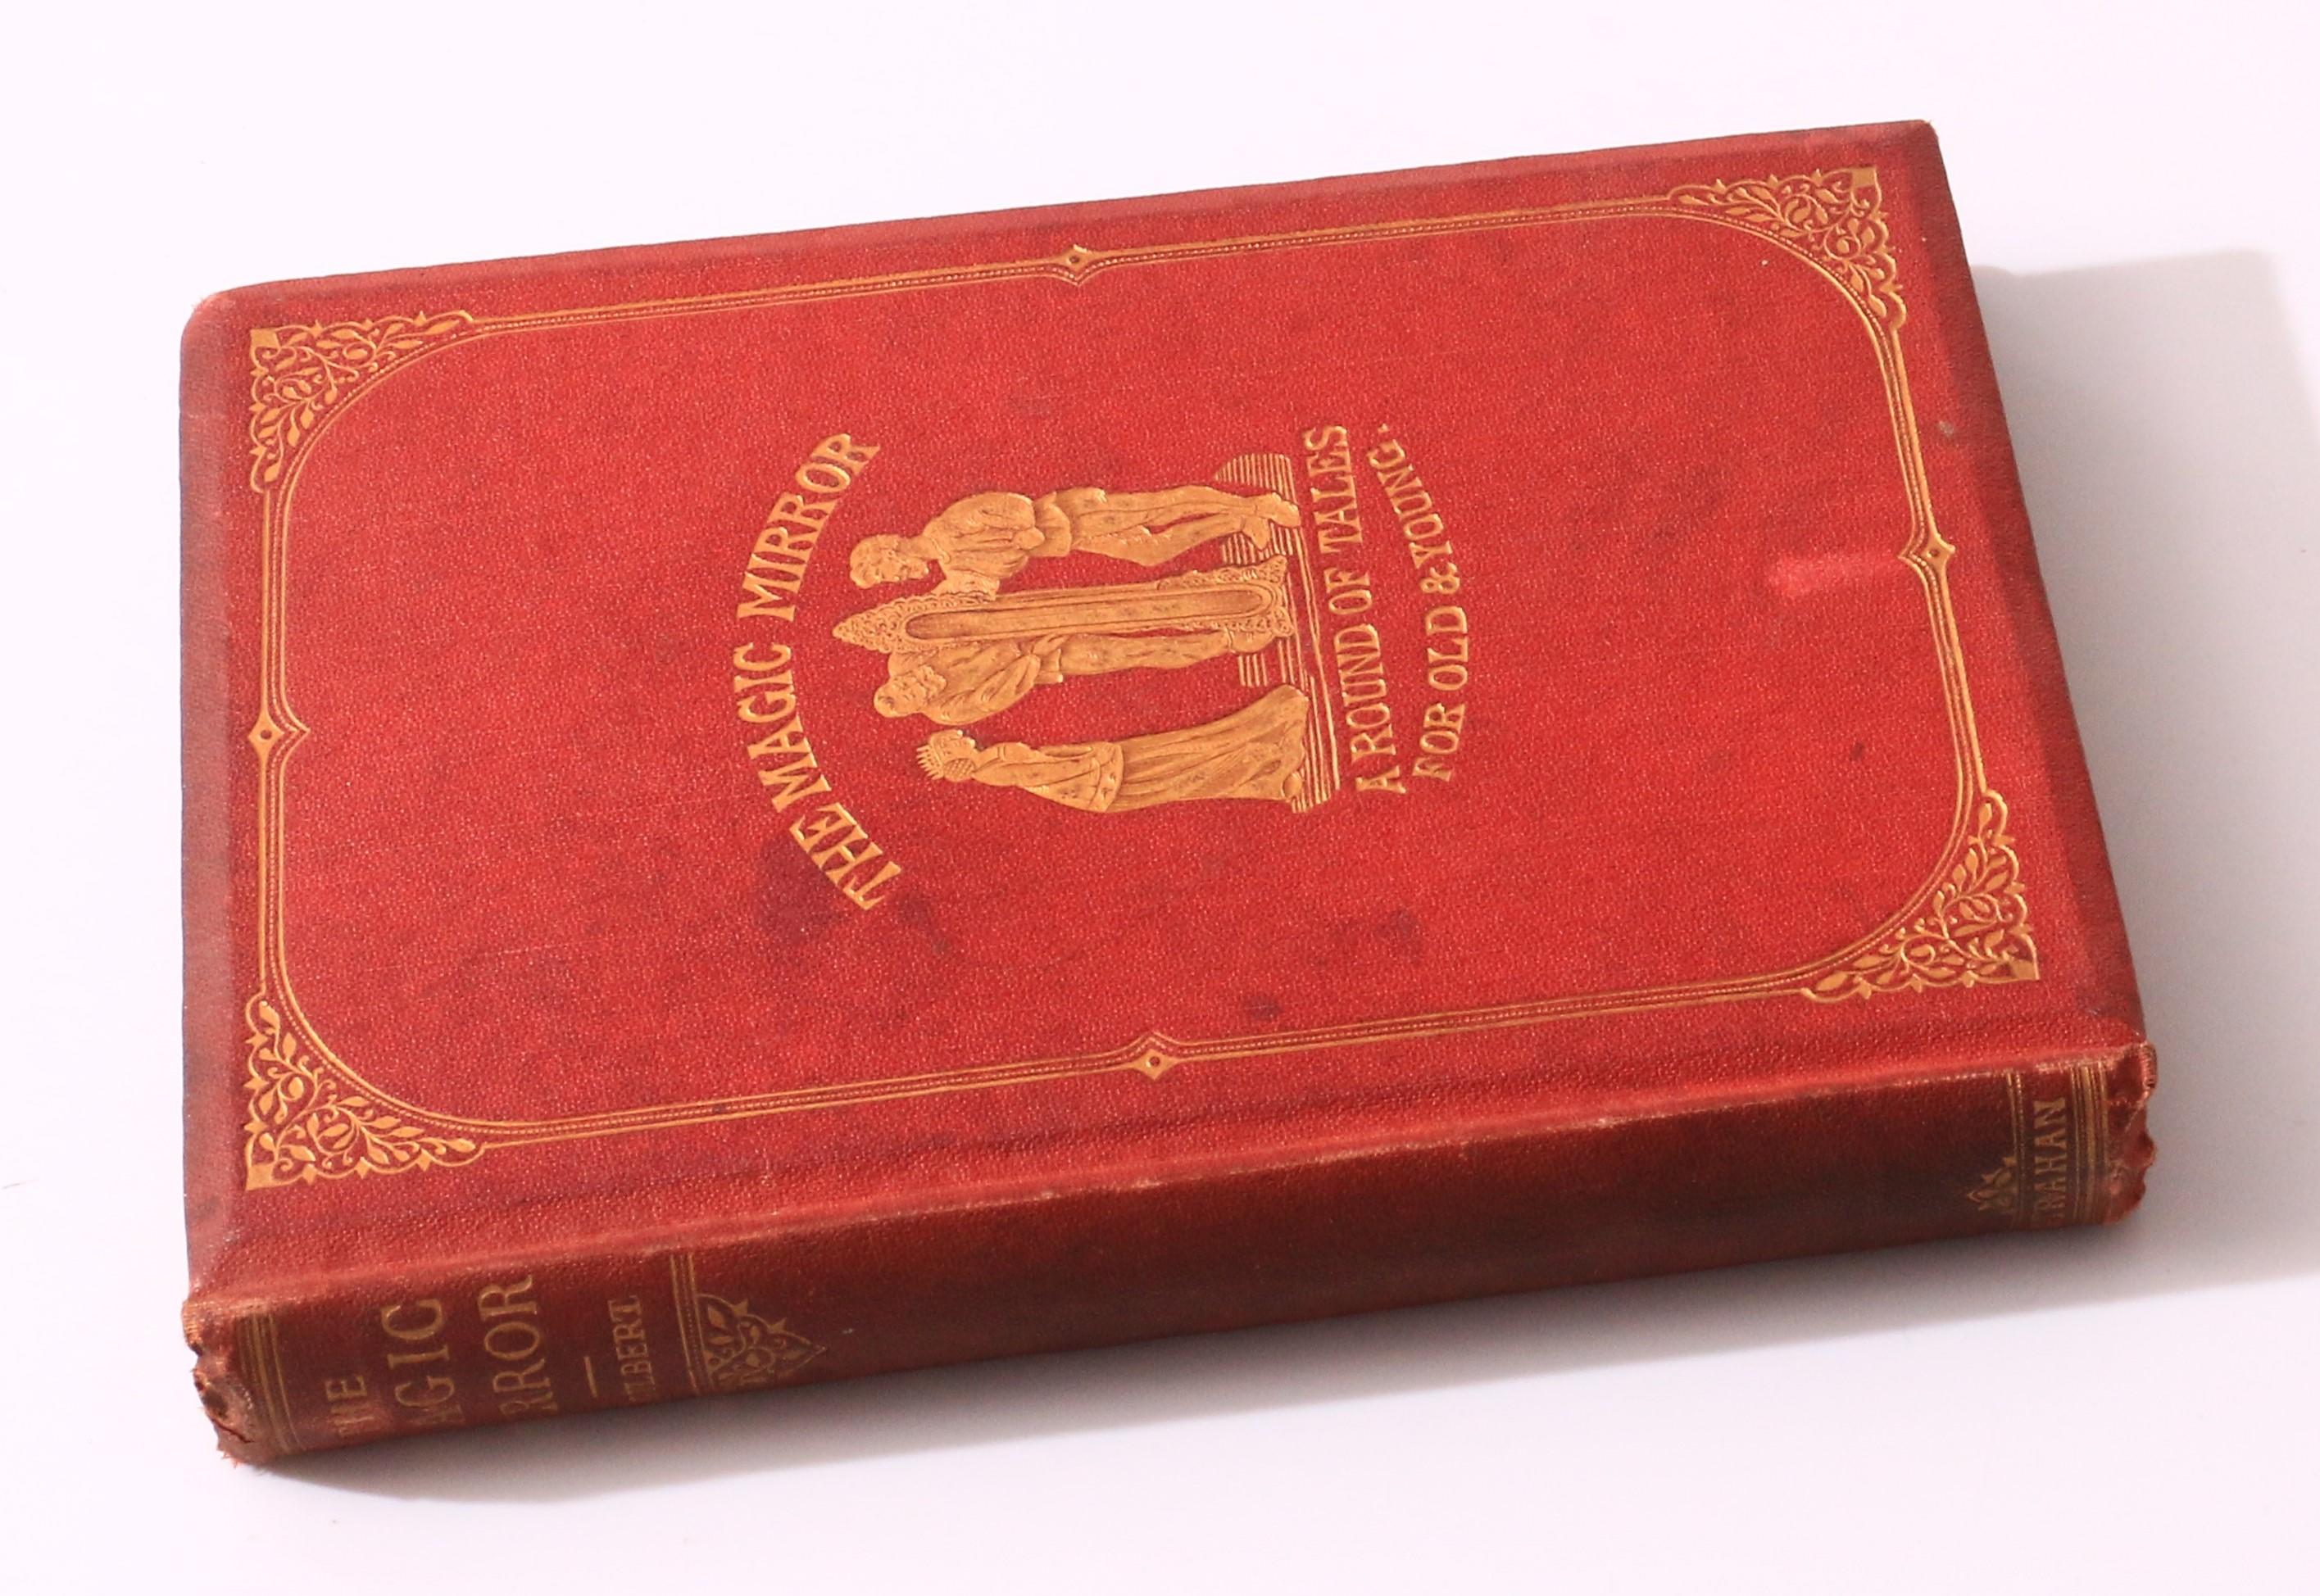 William Gilbert - The Magic Mirror: A Round of Tales for Old & Young - Alexander Strahan, 1866, First Edition.